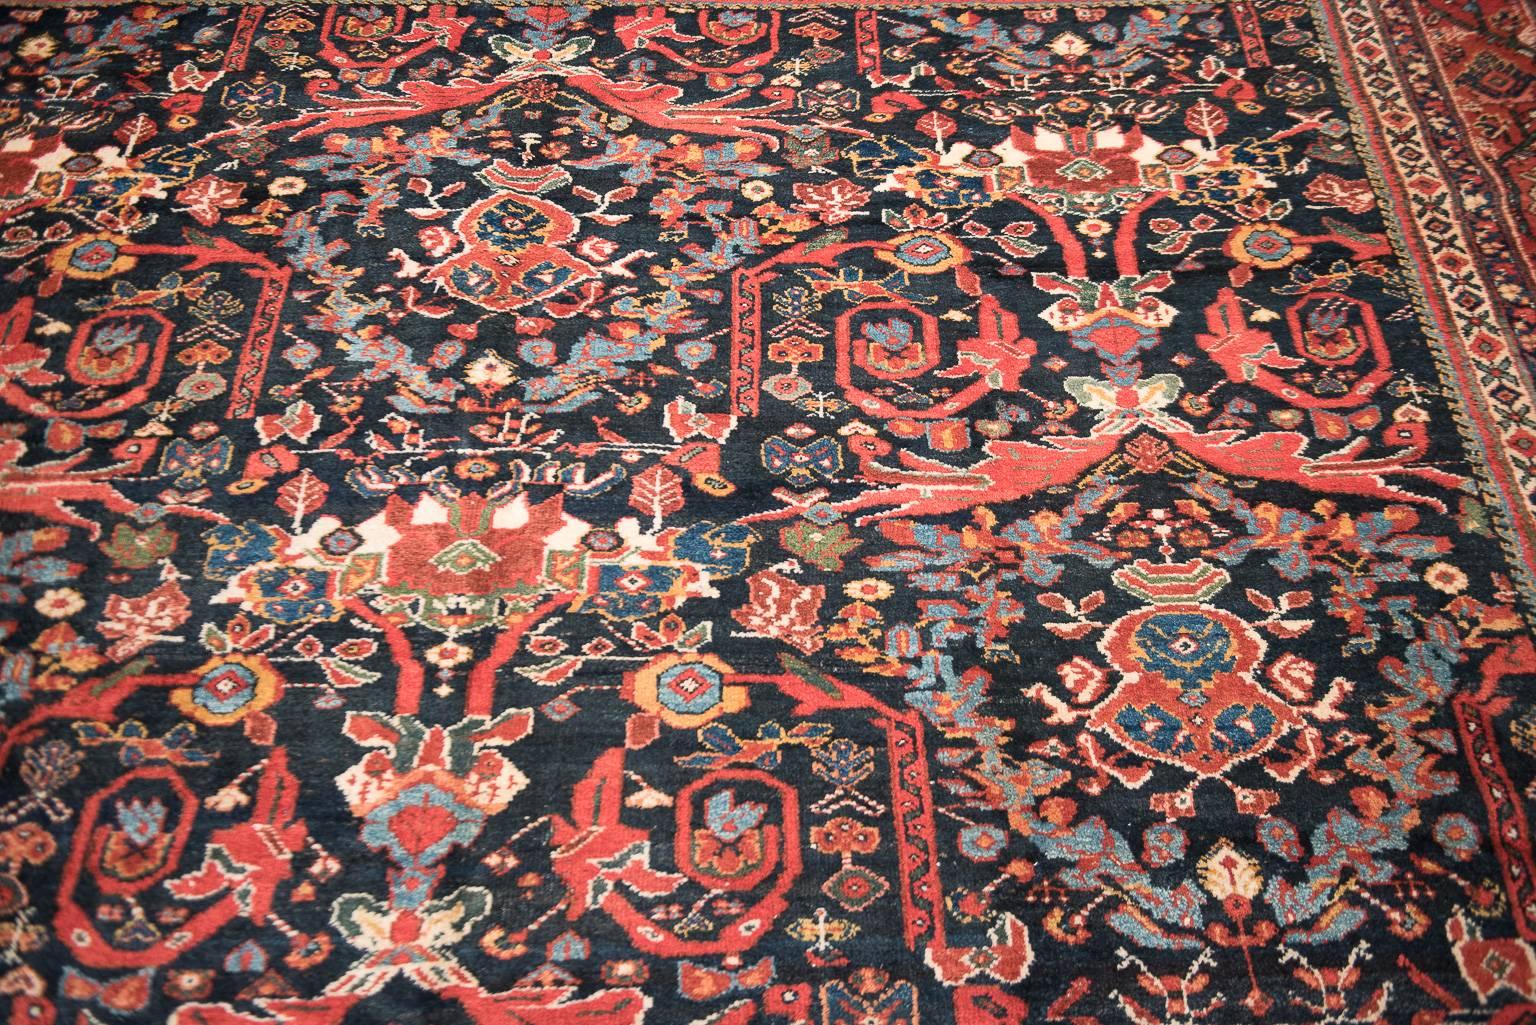 This antique Mahal carpet is so bold in crimson and navy that it is practically twisting free from its knots, stretching its weft and weave to fill every last inch of its 11’ by 16’ with its intricate all-over design. The Mahal featires an all-over